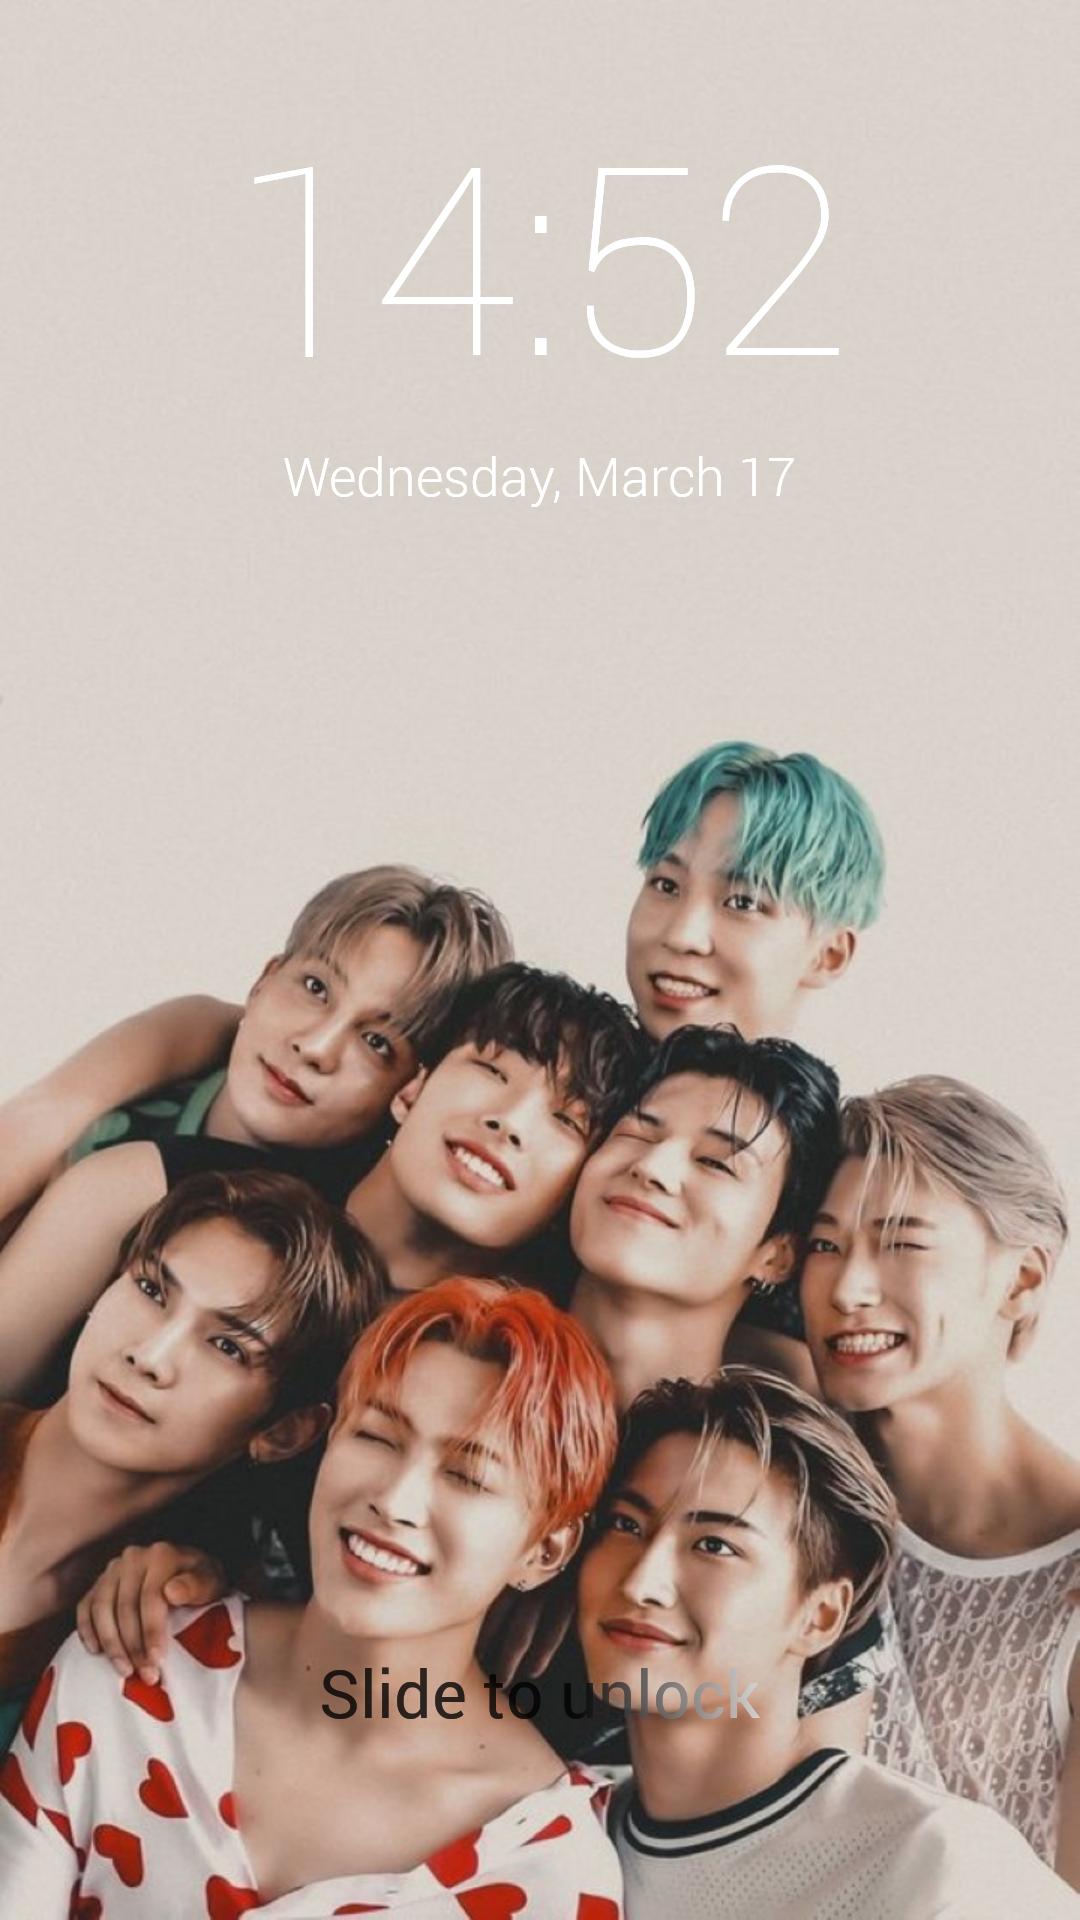 Ateez Lock Screen & Wallpapers Apk For Android Download